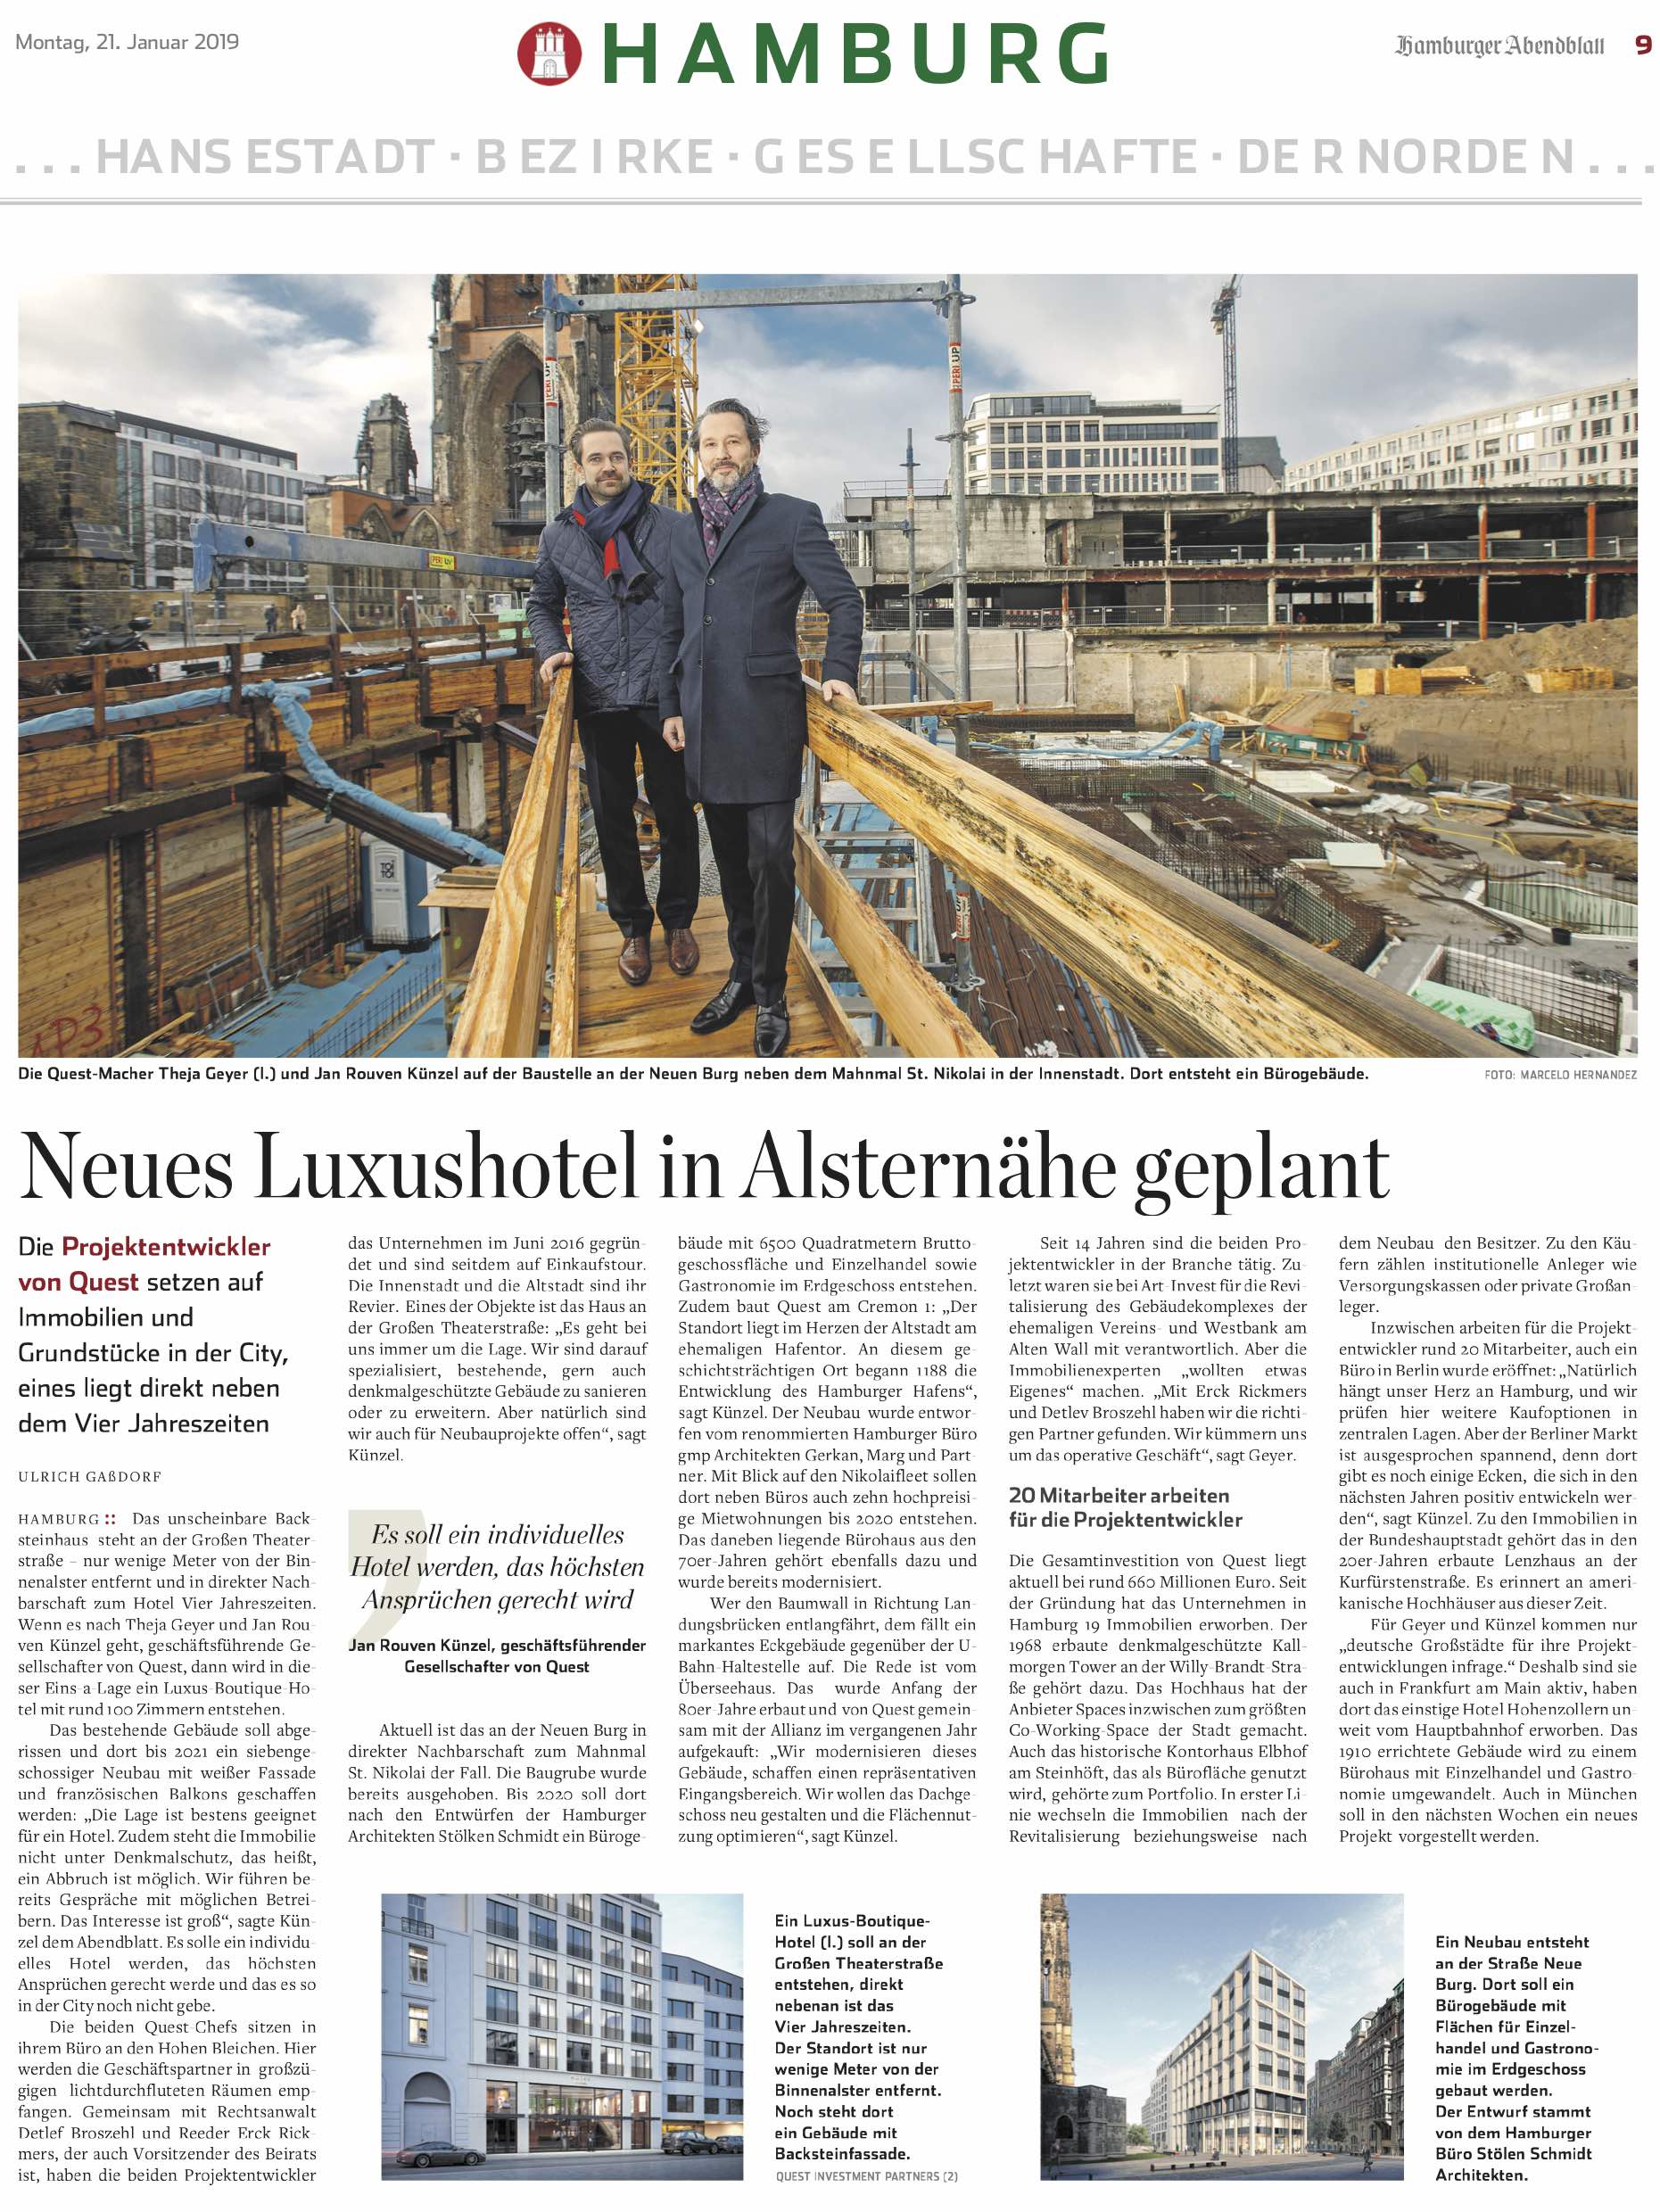 Plans For New Luxury Hotel Near Lake Alster Quest Investment Partners